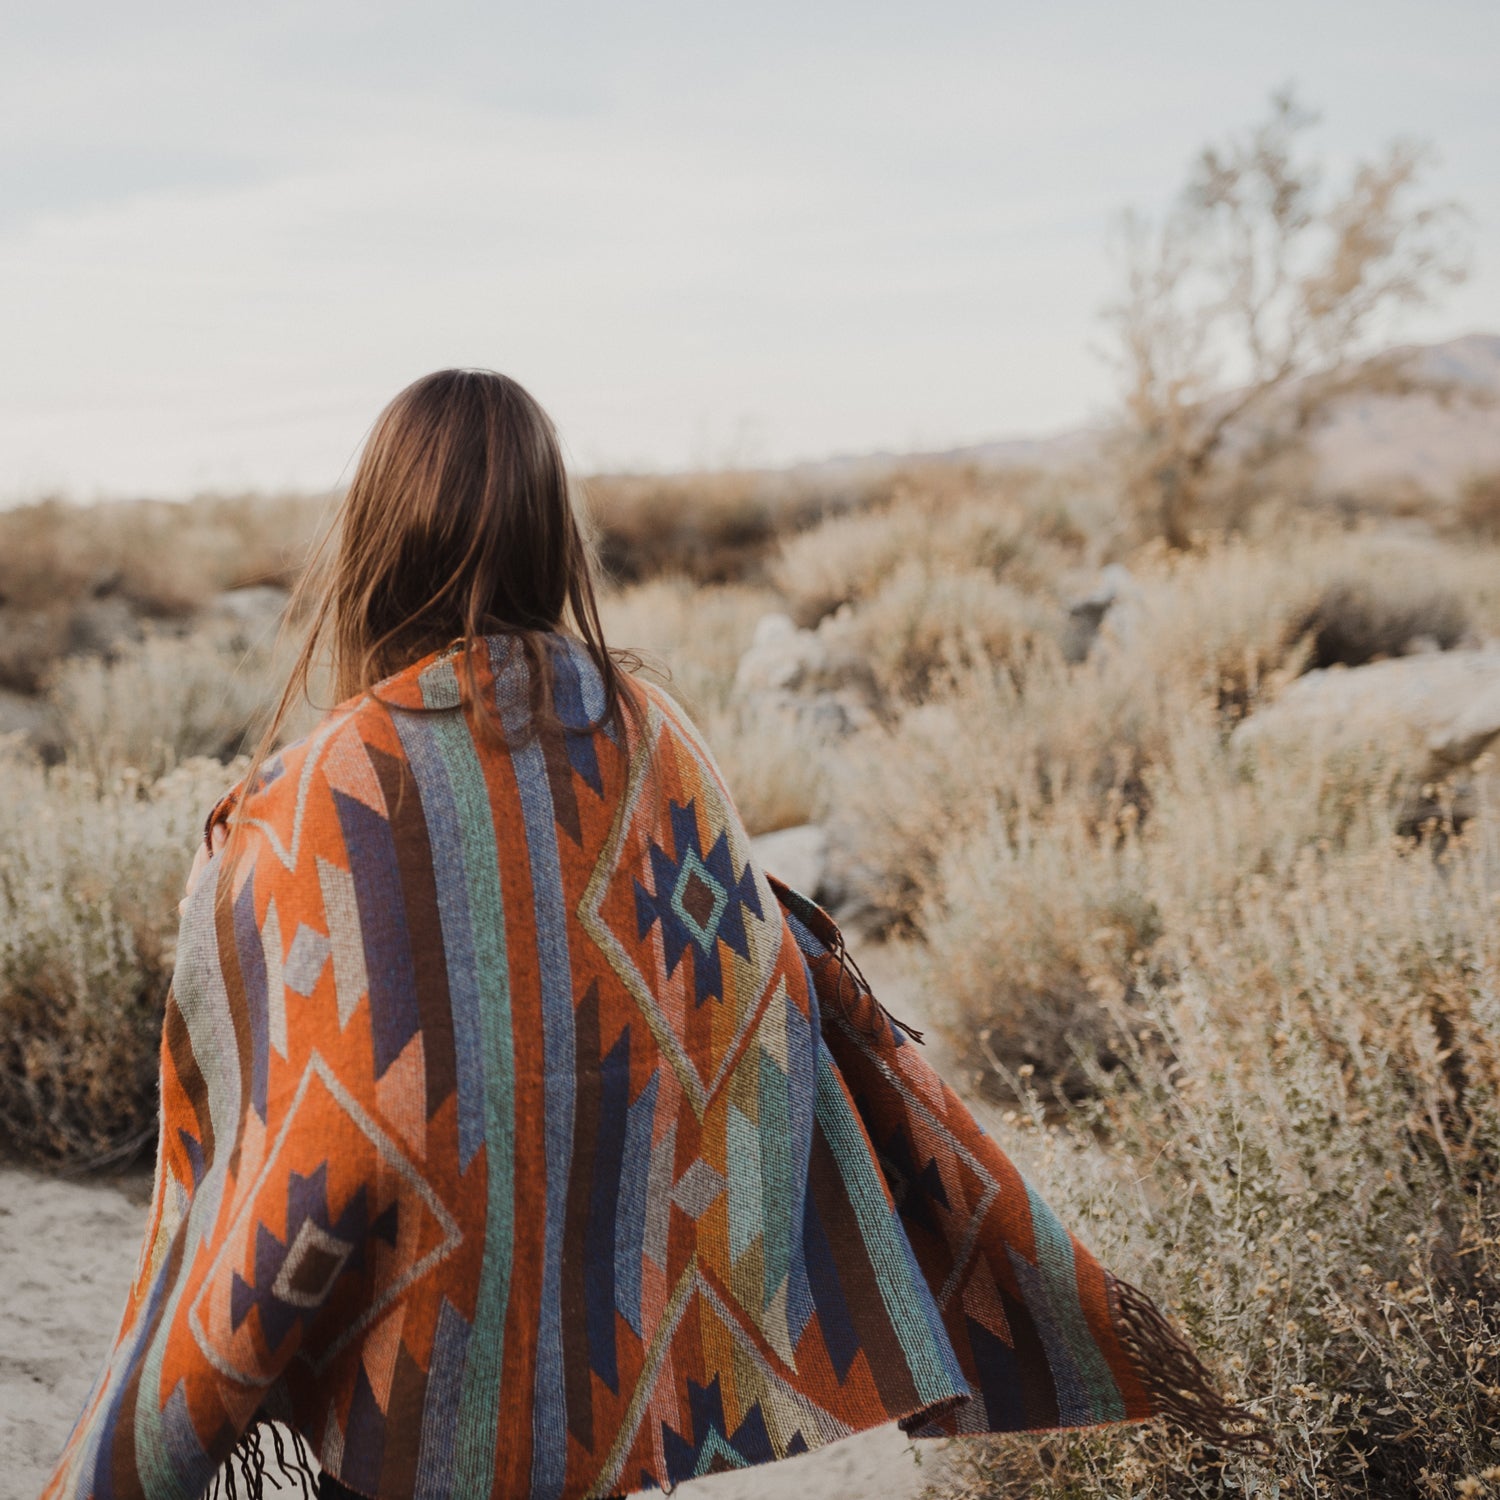 A meditative photo of a woman wrapped in a blanked on a tranquil desert morning. This photo inspires Tuscany Candle's Fragrance "Desert Detox"